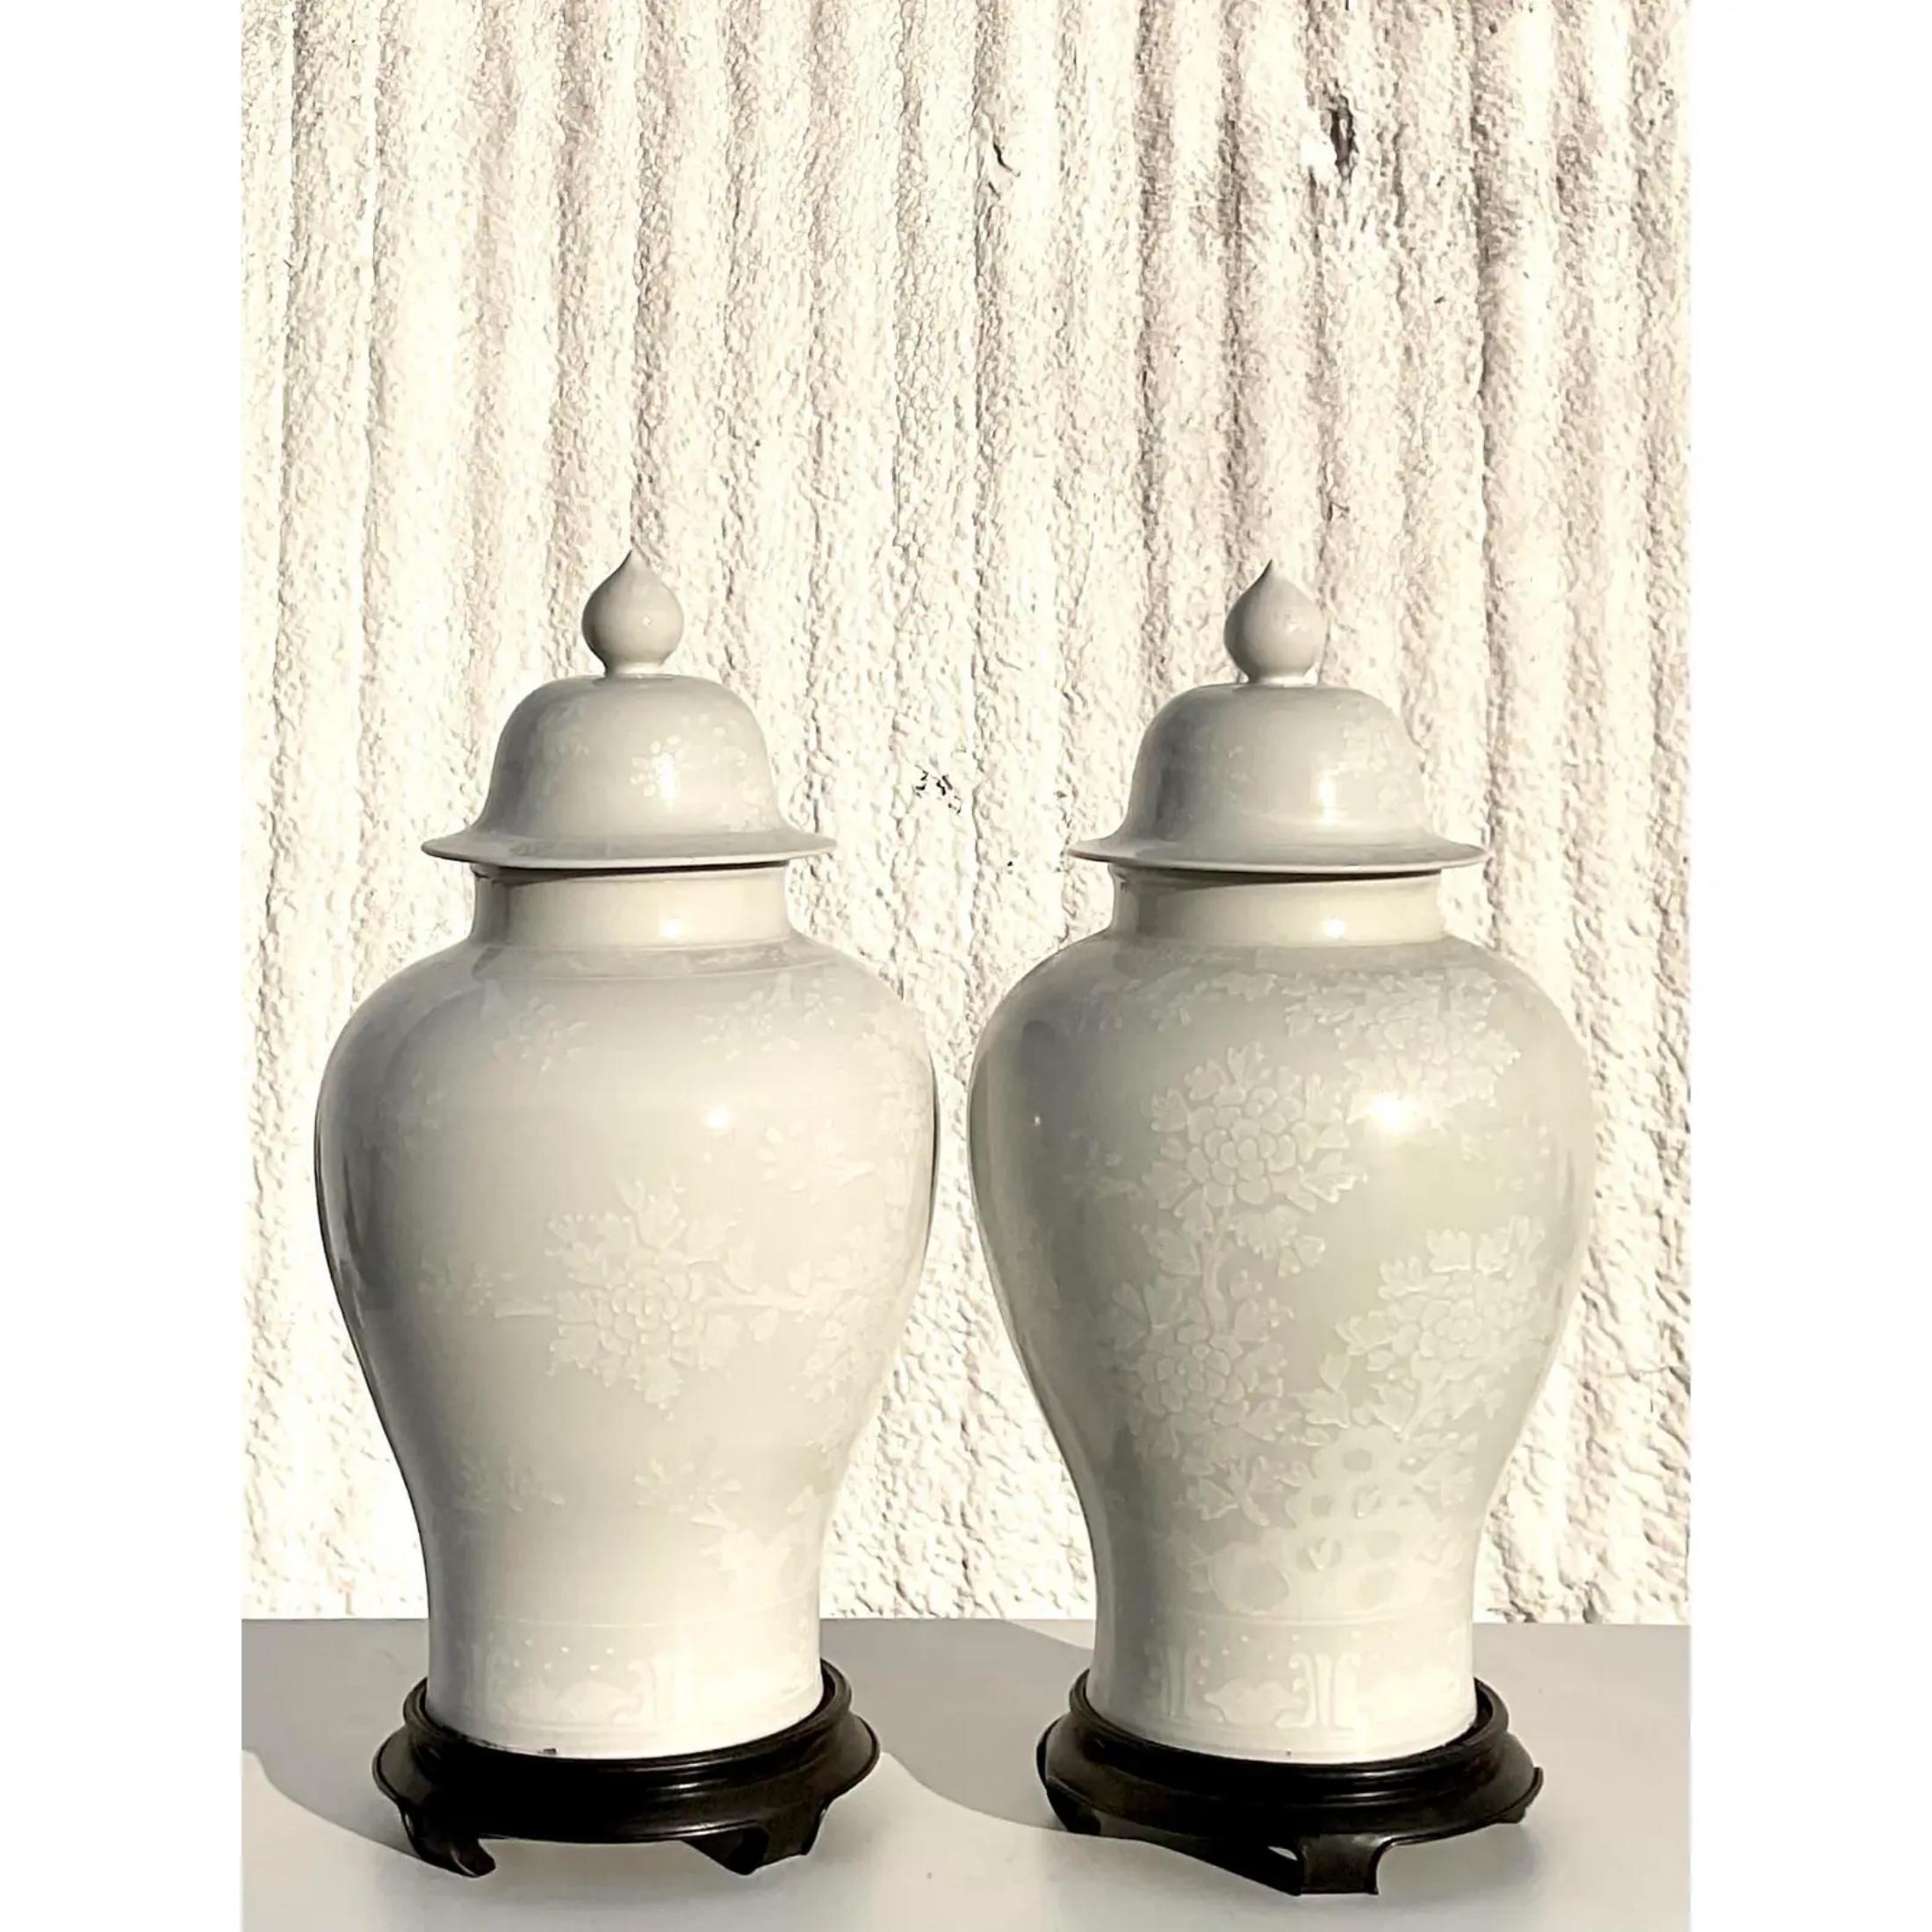 Fabulous pair of white Asian ginger jar urns. Beautiful tone on tone floral design. Rest on ebony wooden plinths. Acquired from a Palm Beach estate